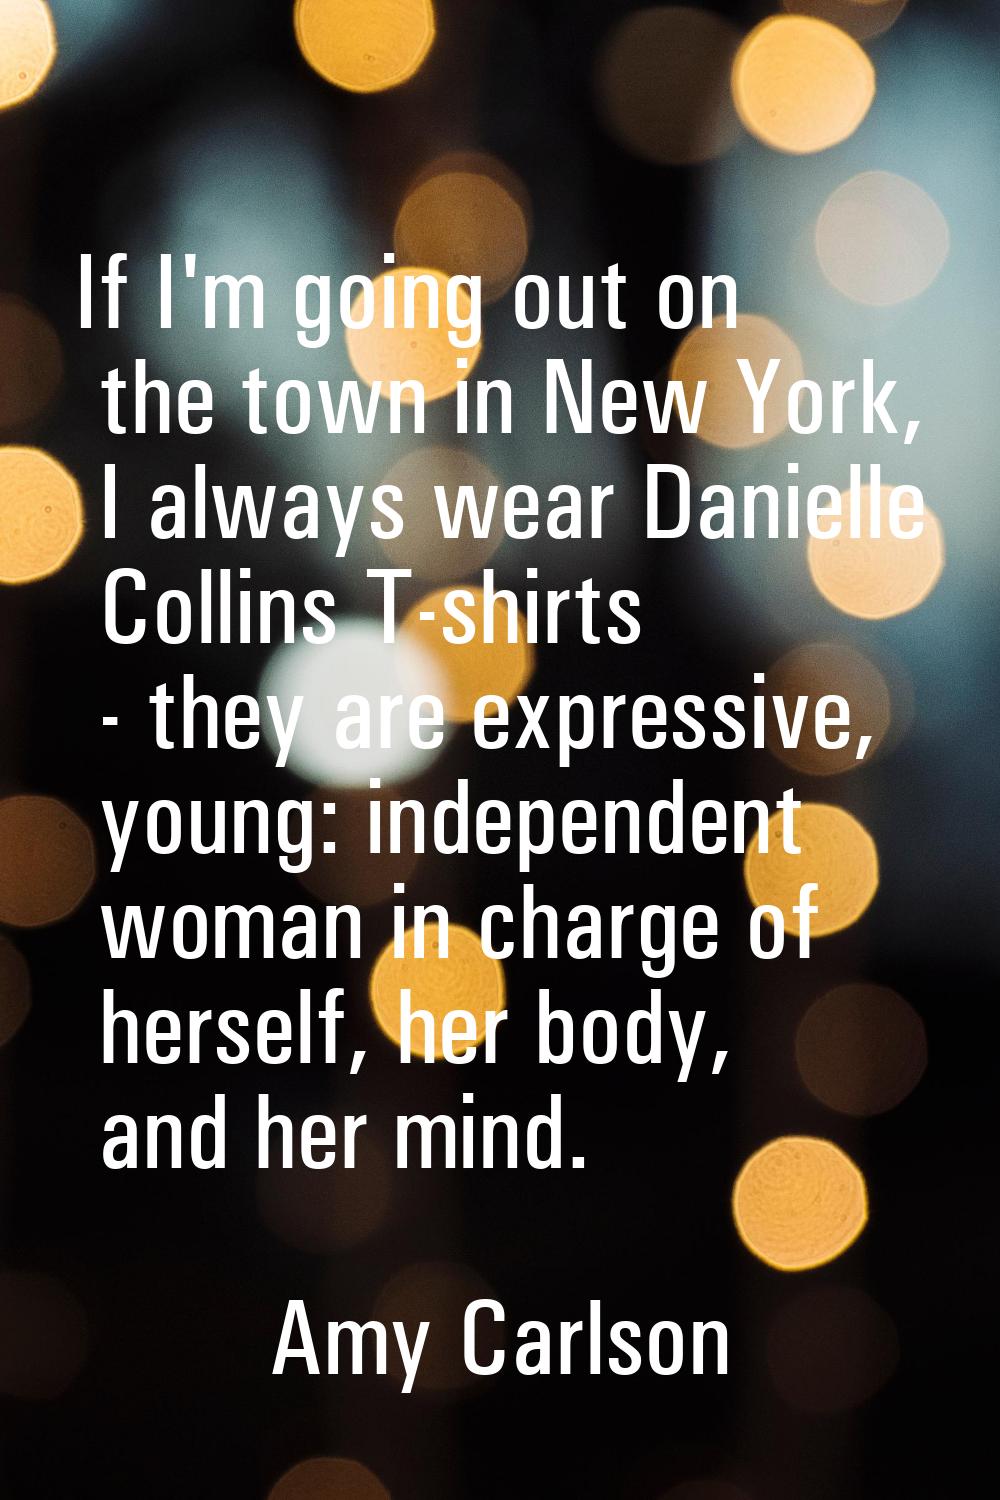 If I'm going out on the town in New York, I always wear Danielle Collins T-shirts - they are expres